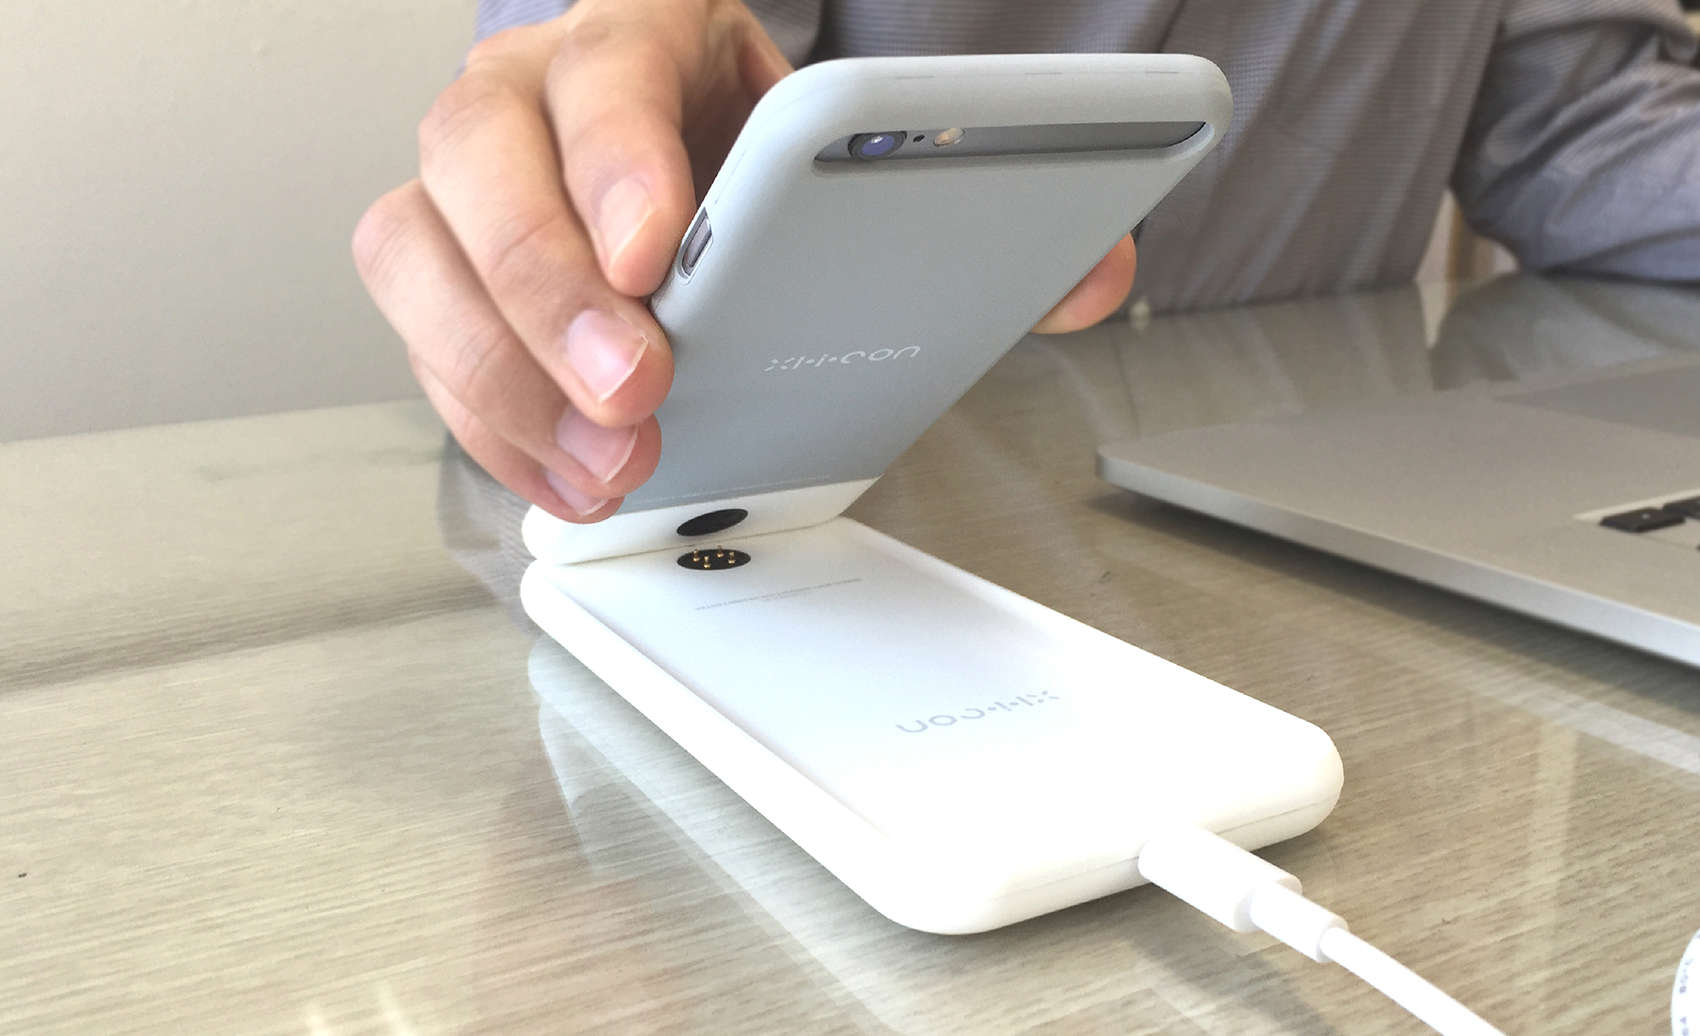 The XI.i.CON is a case-dock charging combo for the iPhone 6, 6 Plus, 6s and 6s Plus.